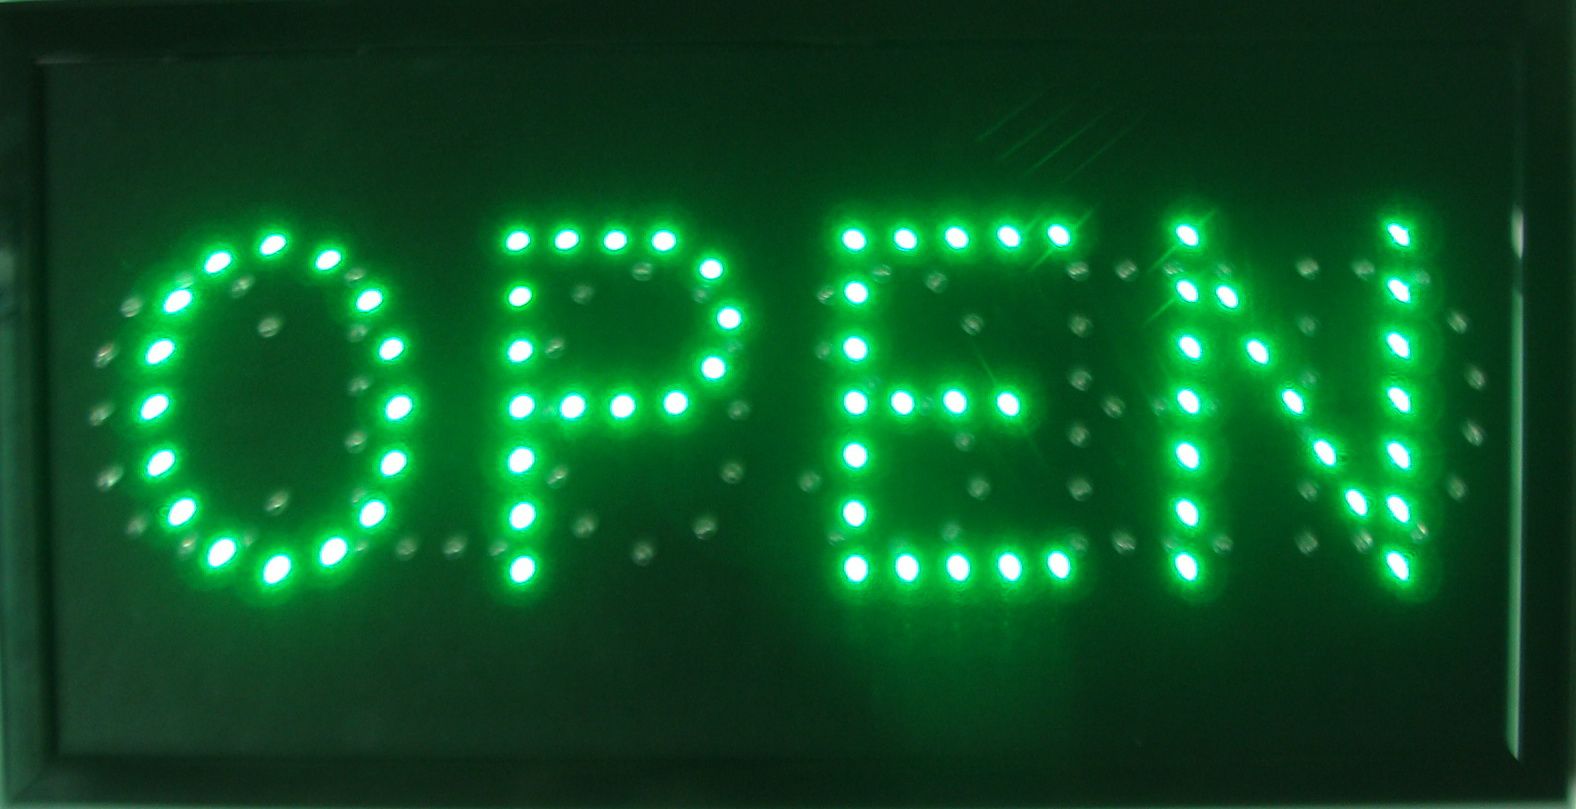 Discount Hot Sale Custom Neon Signs Led Neon Open Sign Green Eye Catching Slogans Board Top LED Boards & Billboards Online | DHgate.Com